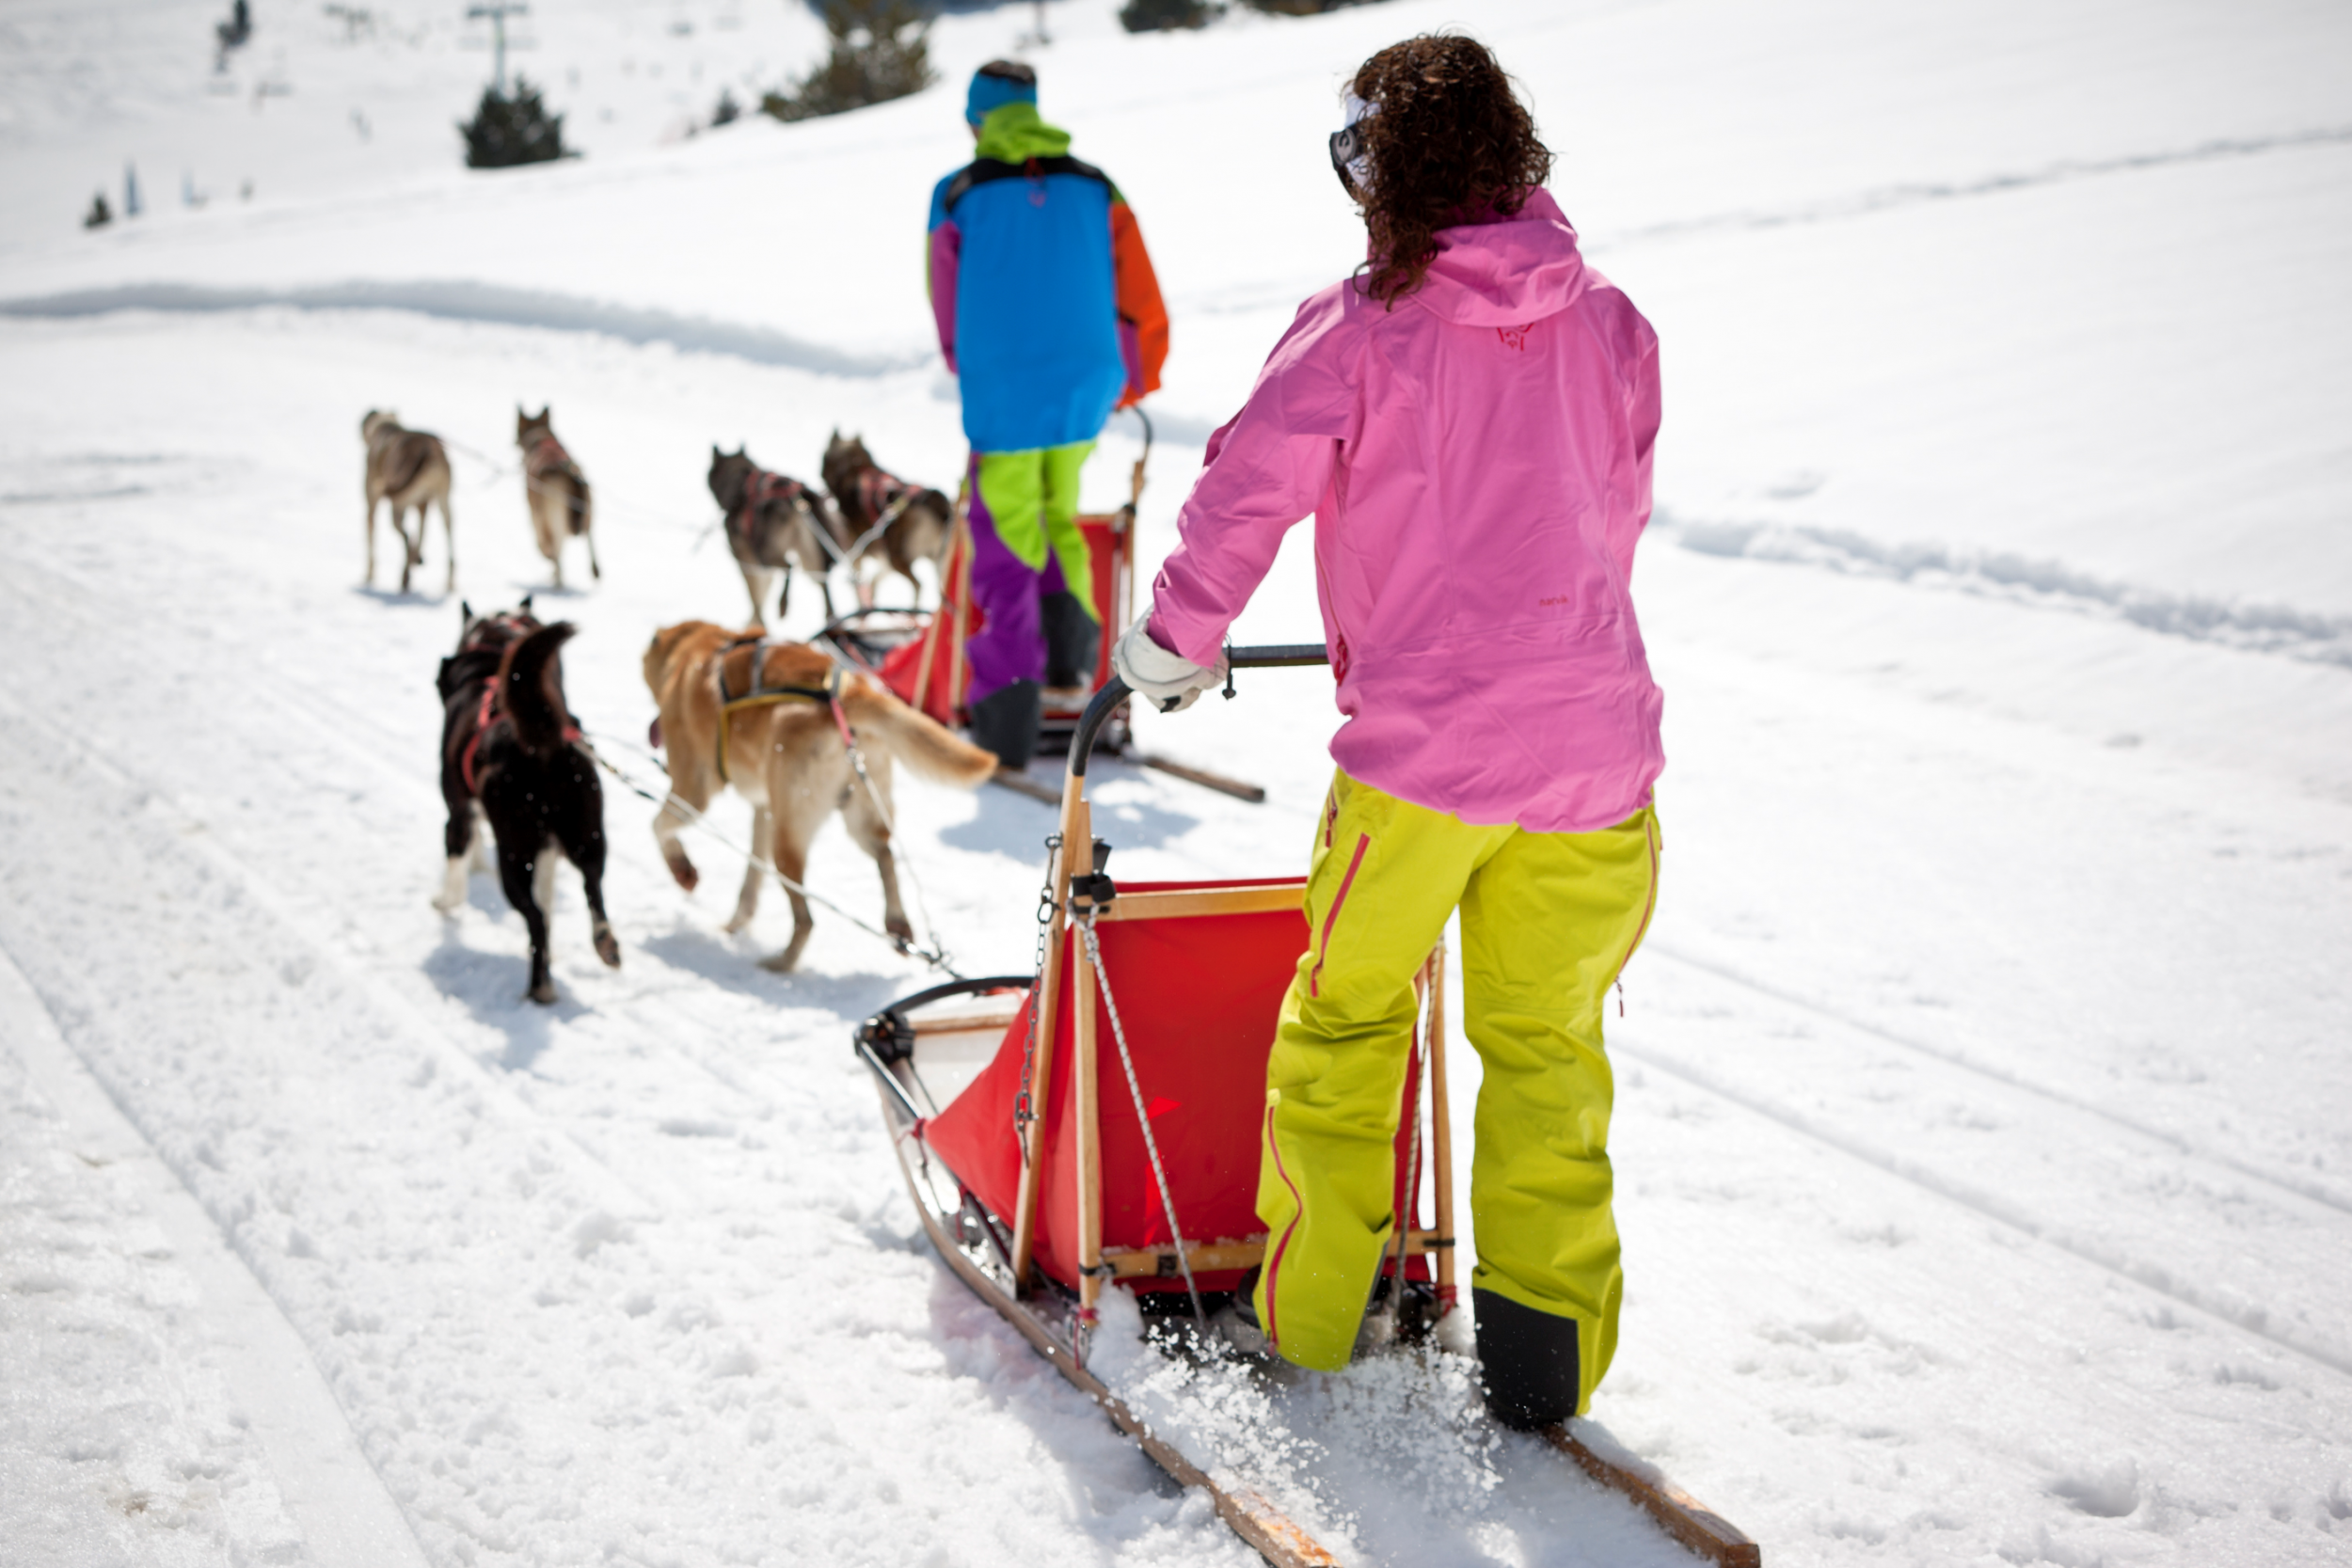 Alternative activities such as dog-sledding are available in Soldeu